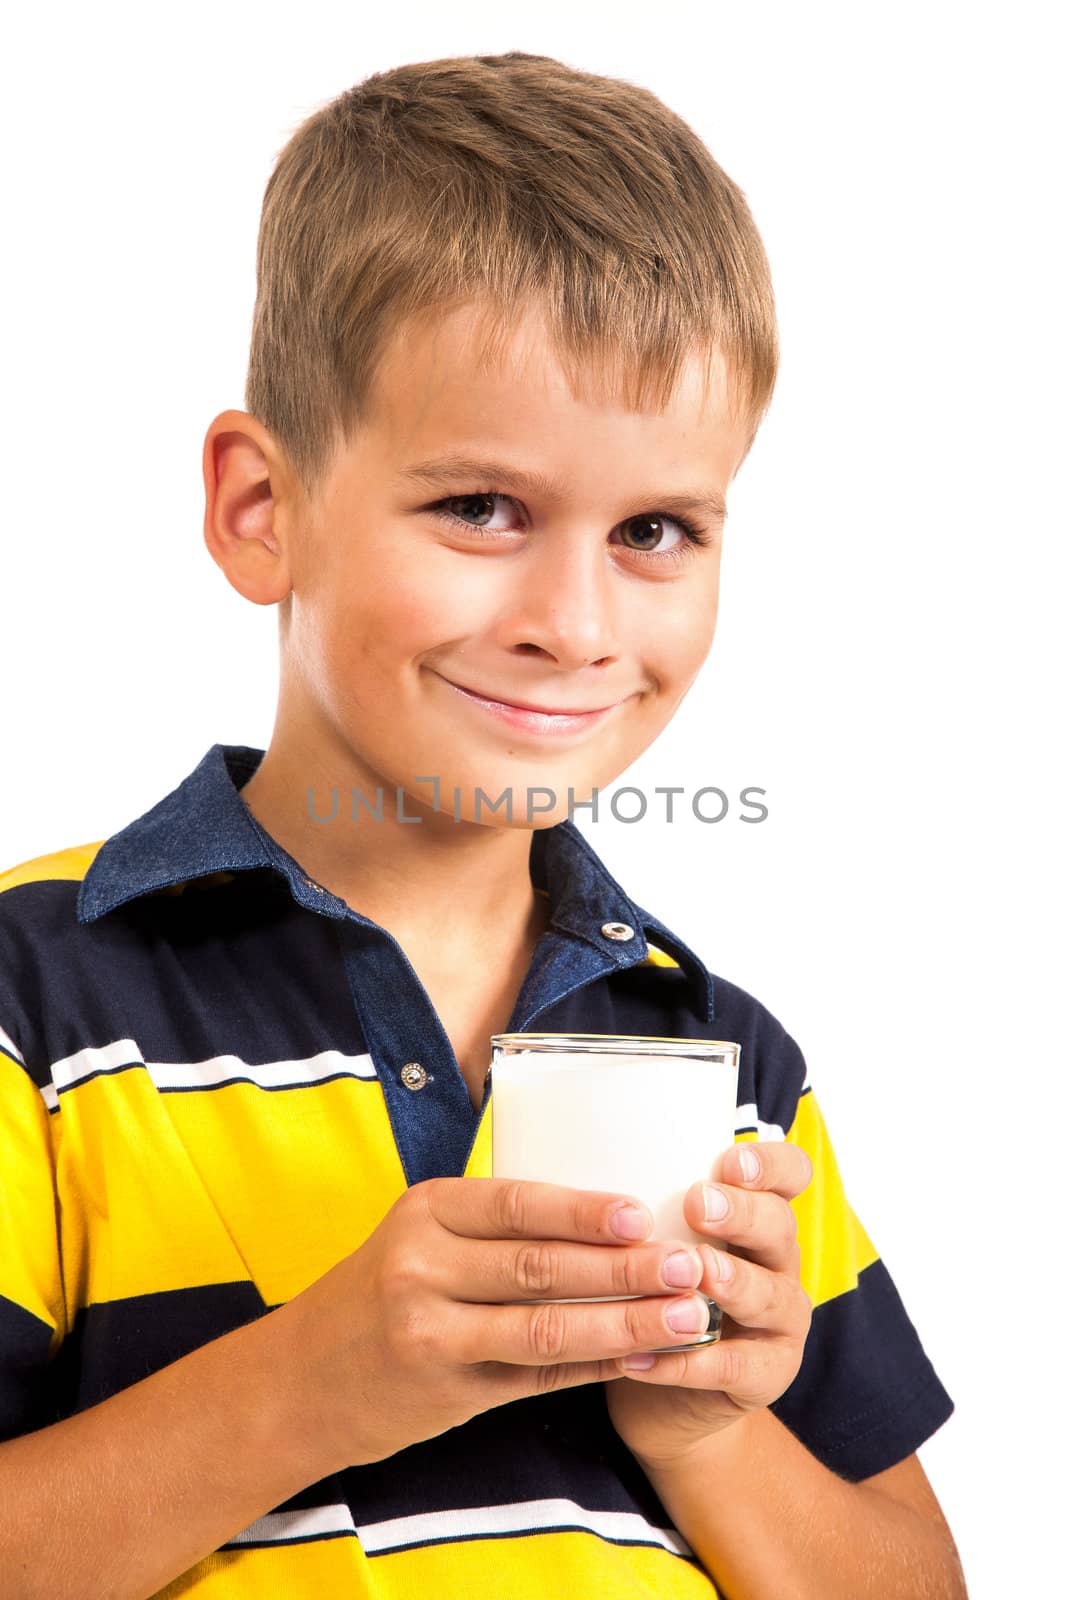 Сute boy is drinking milk. Schoolboy is holding a cup of milk isolated on a white background